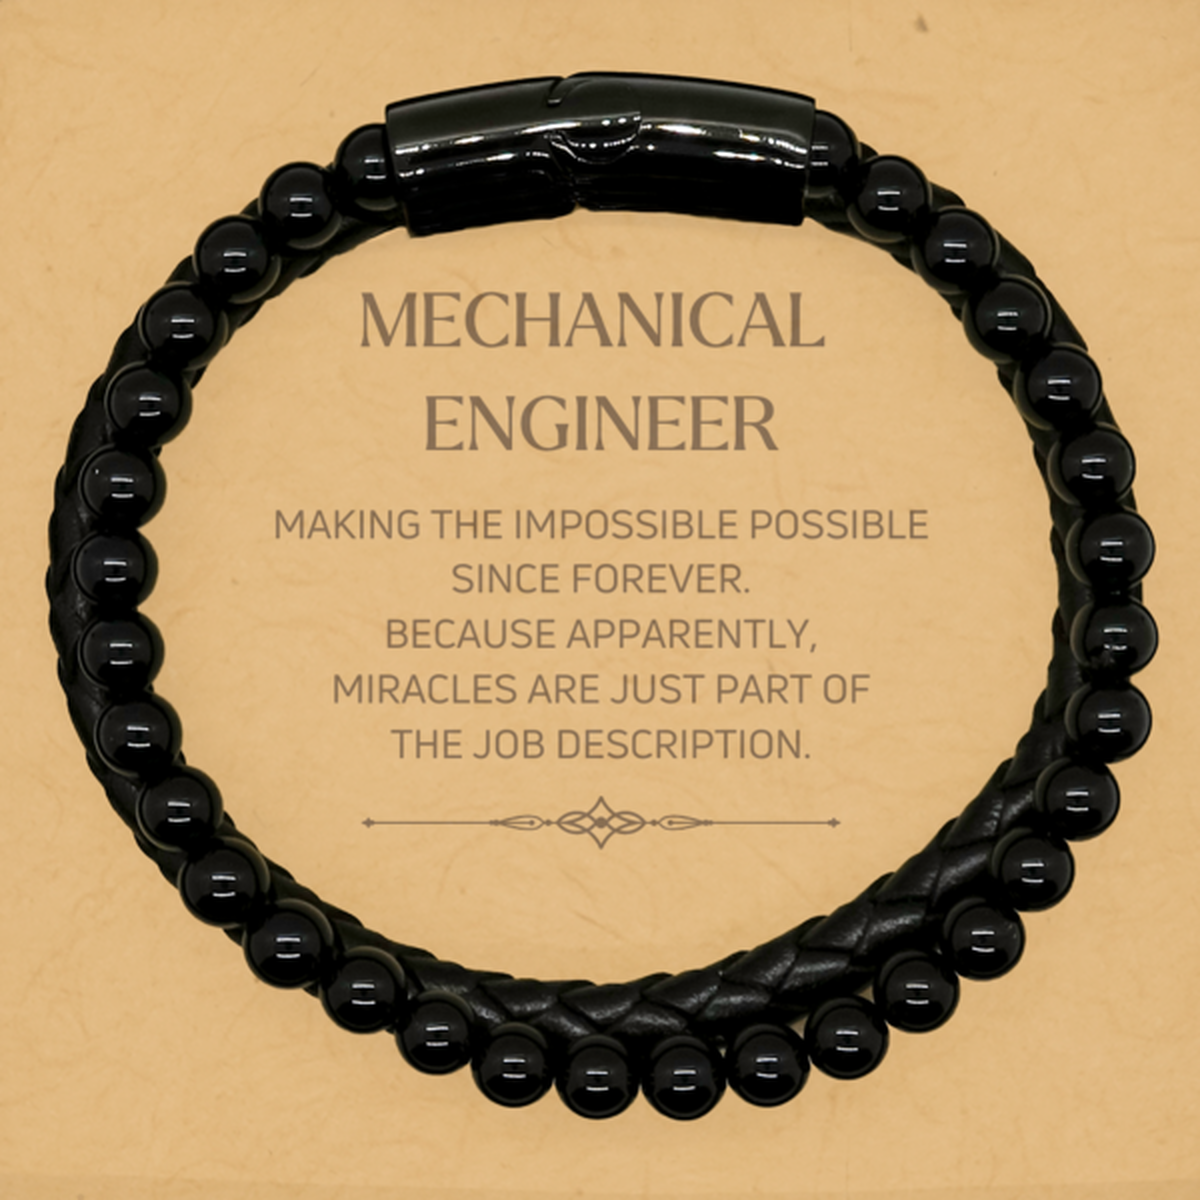 Funny Mechanical Engineer Gifts, Miracles are just part of the job description, Inspirational Birthday Stone Leather Bracelets For Mechanical Engineer, Men, Women, Coworkers, Friends, Boss